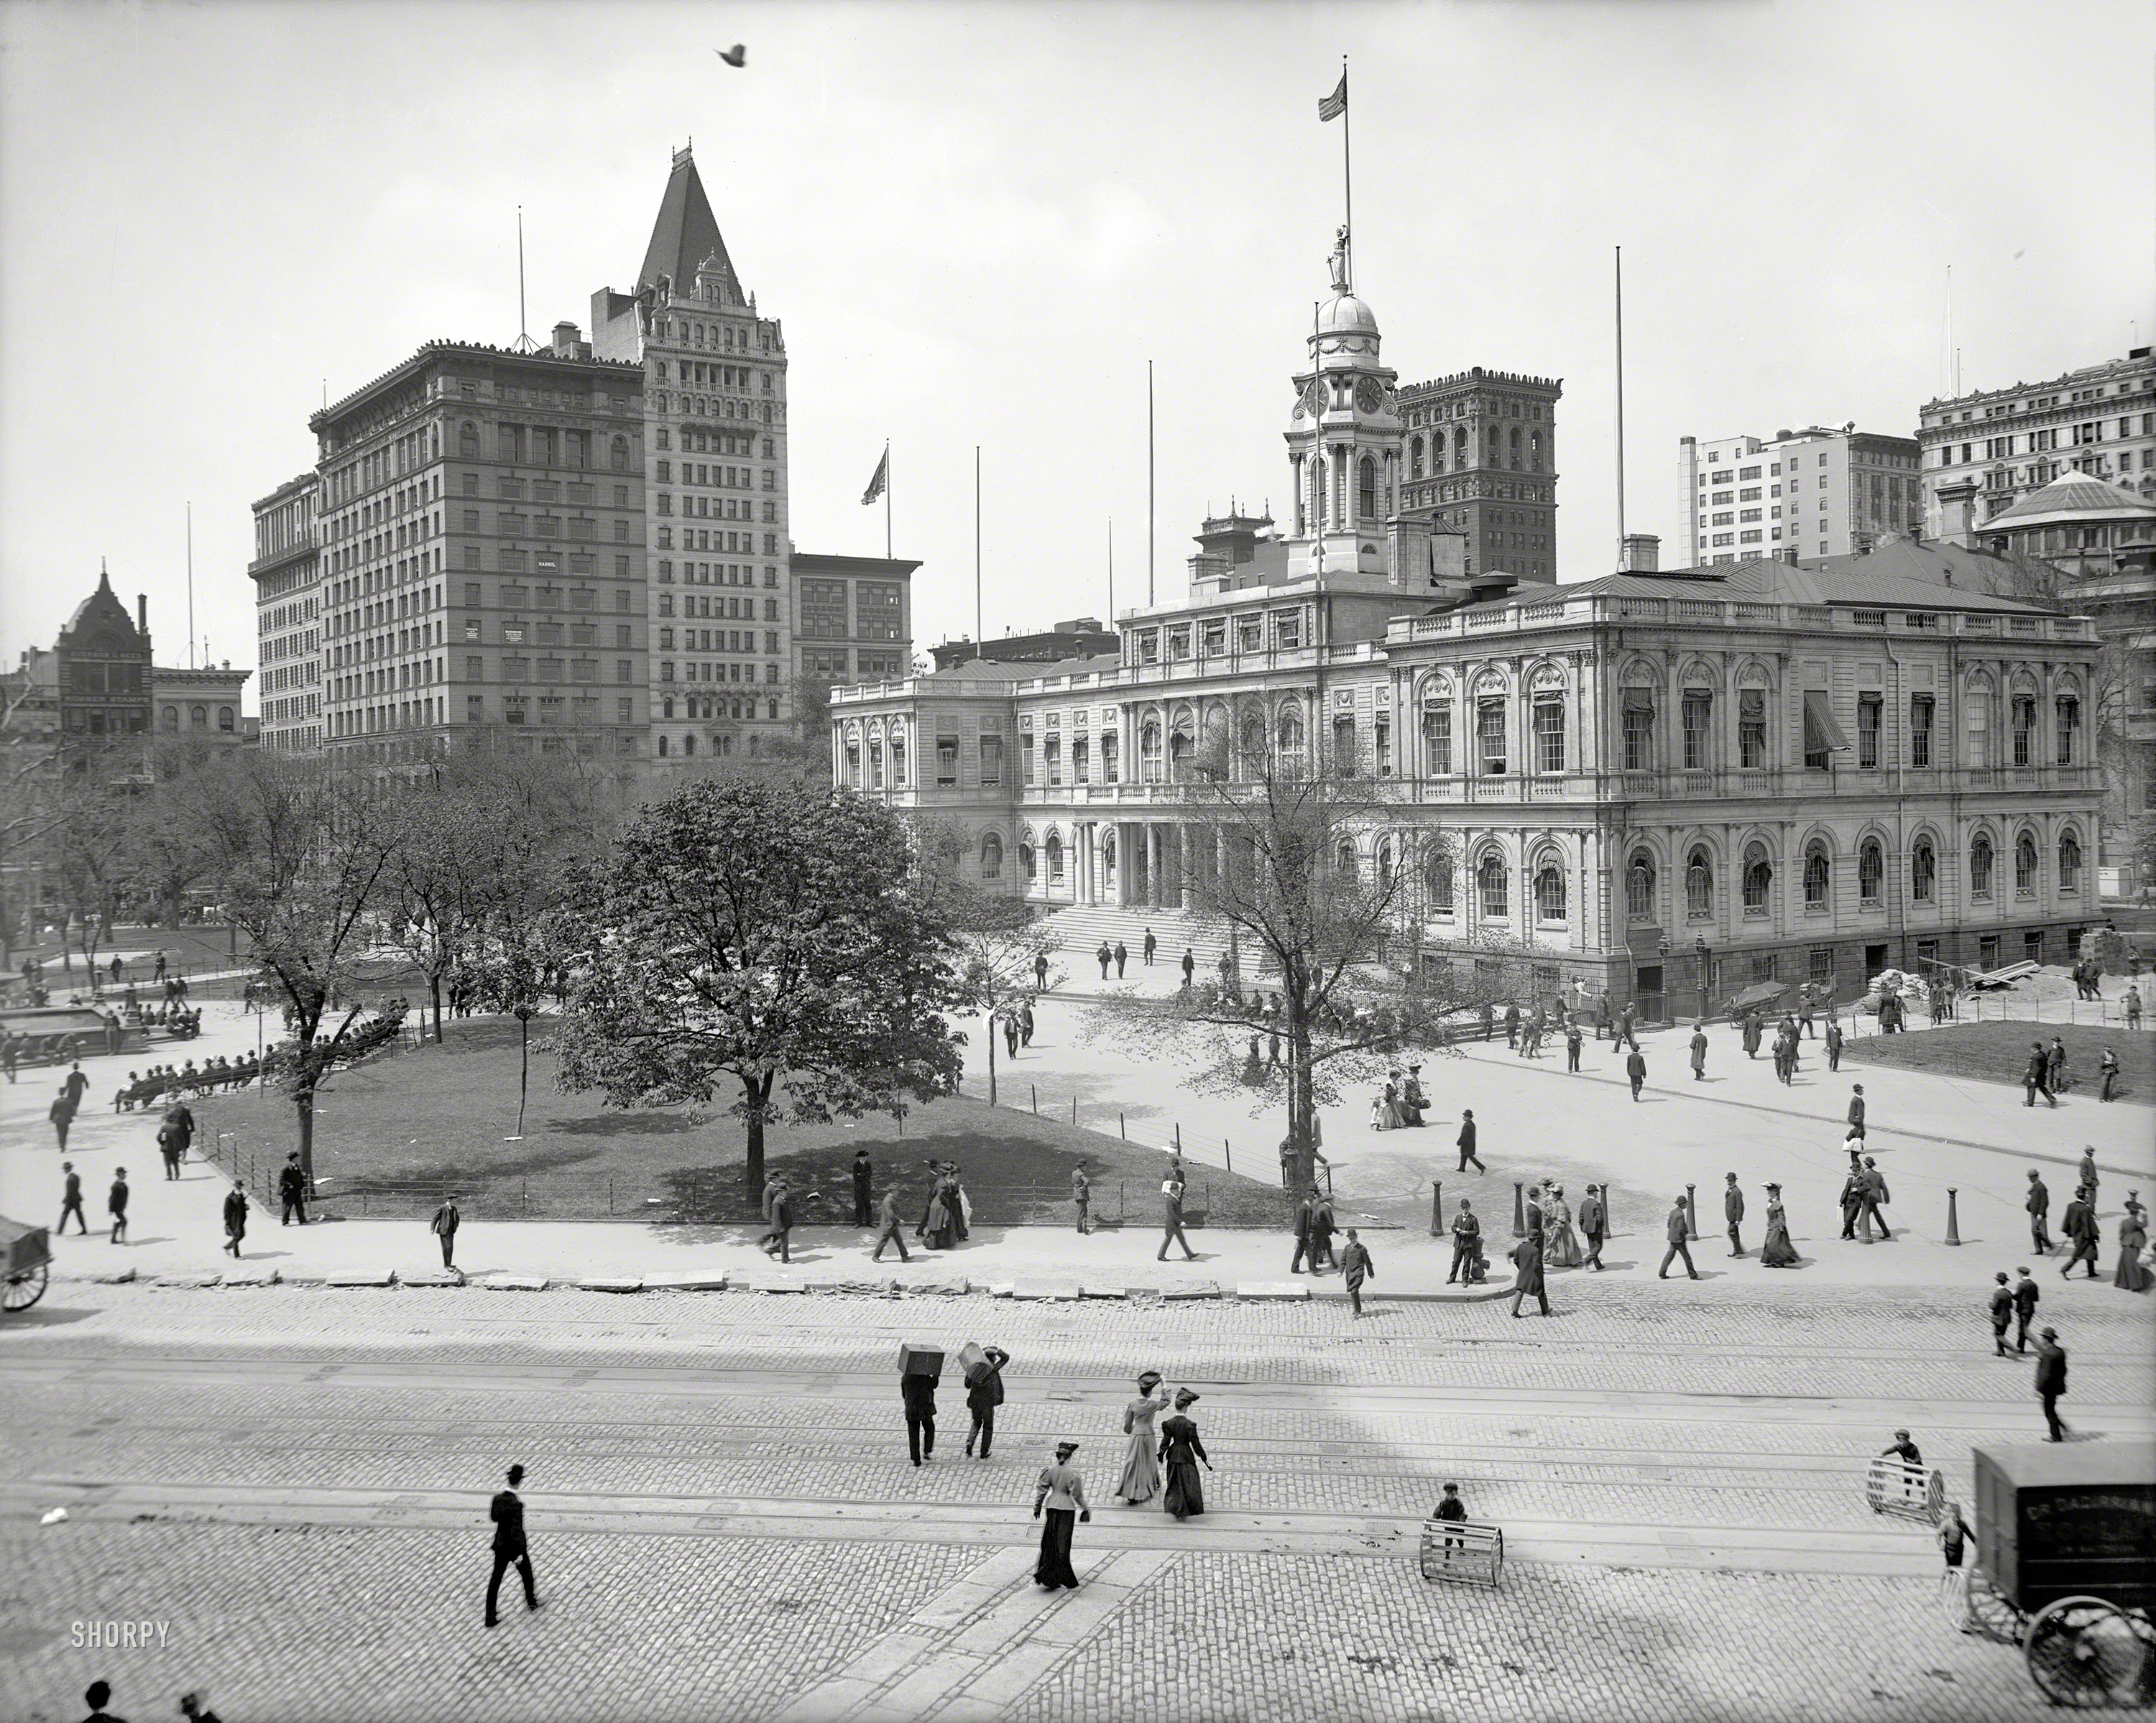 Manhattan circa 1905. "City Hall and Park, New York." 8x10 inch dry plate glass negative, Detroit Publishing Company. View full size.